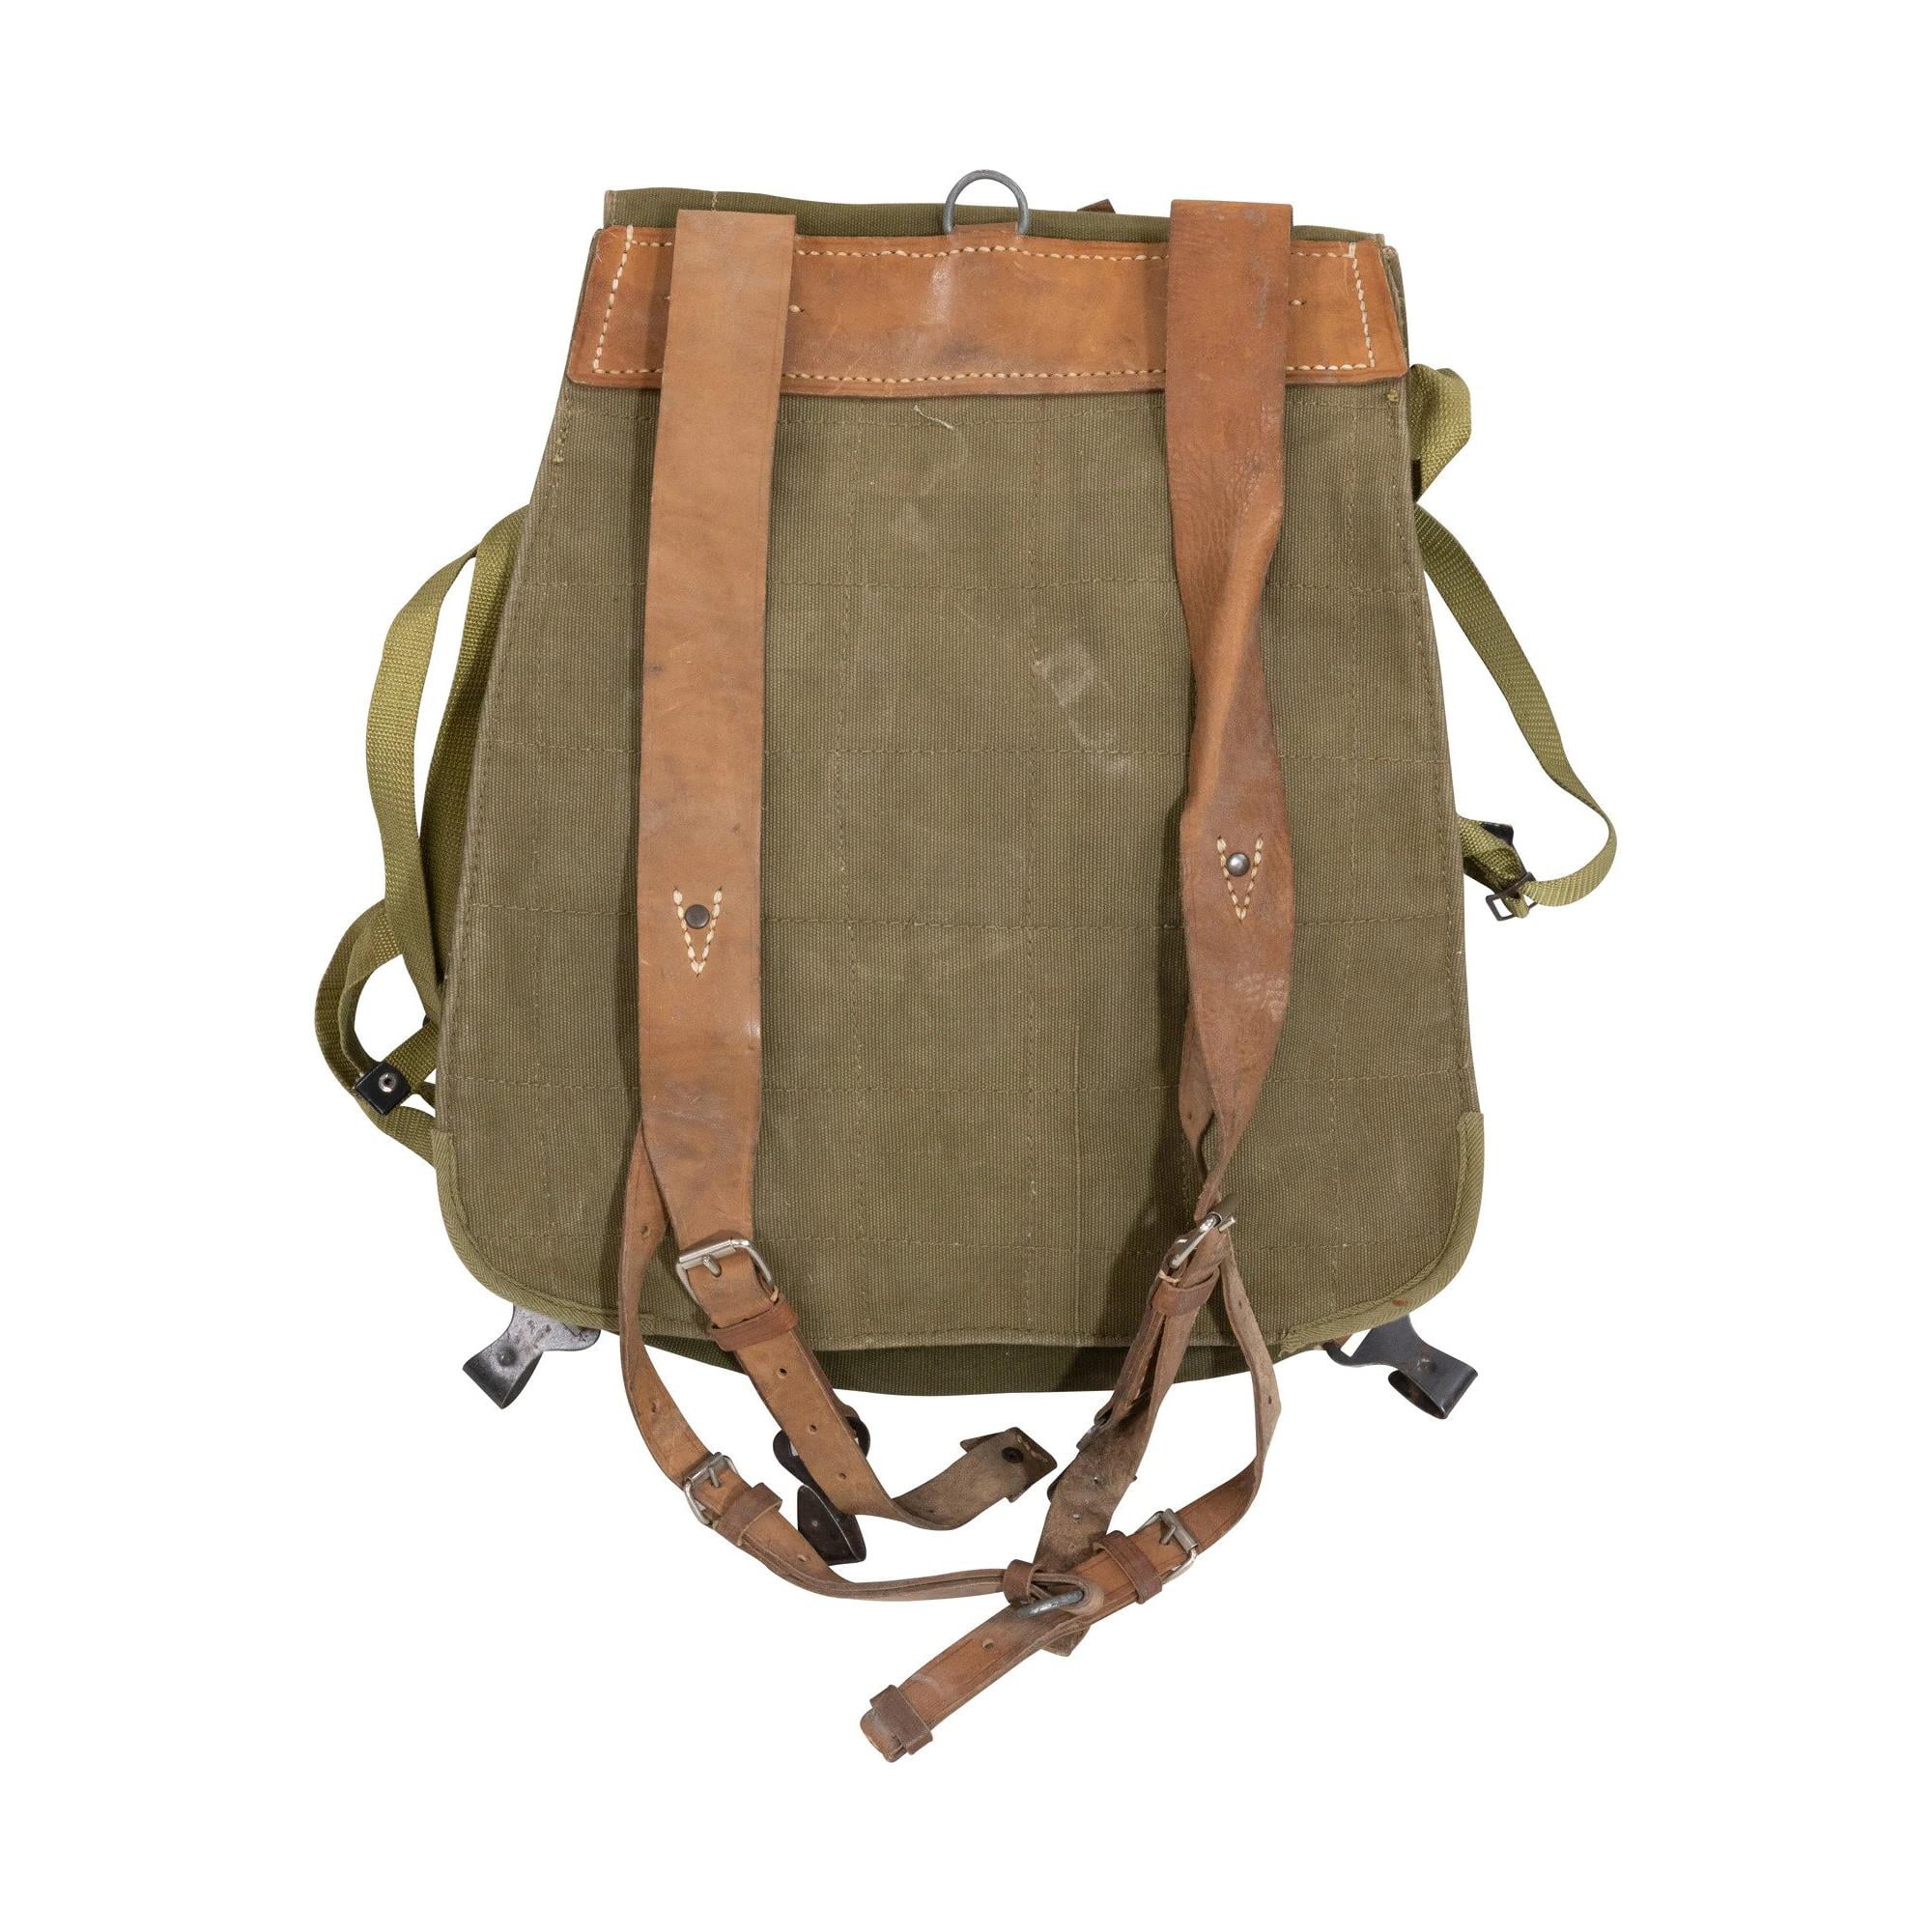 Romanian Military Rucksack, Canvas Backpack, Leather Shoulder